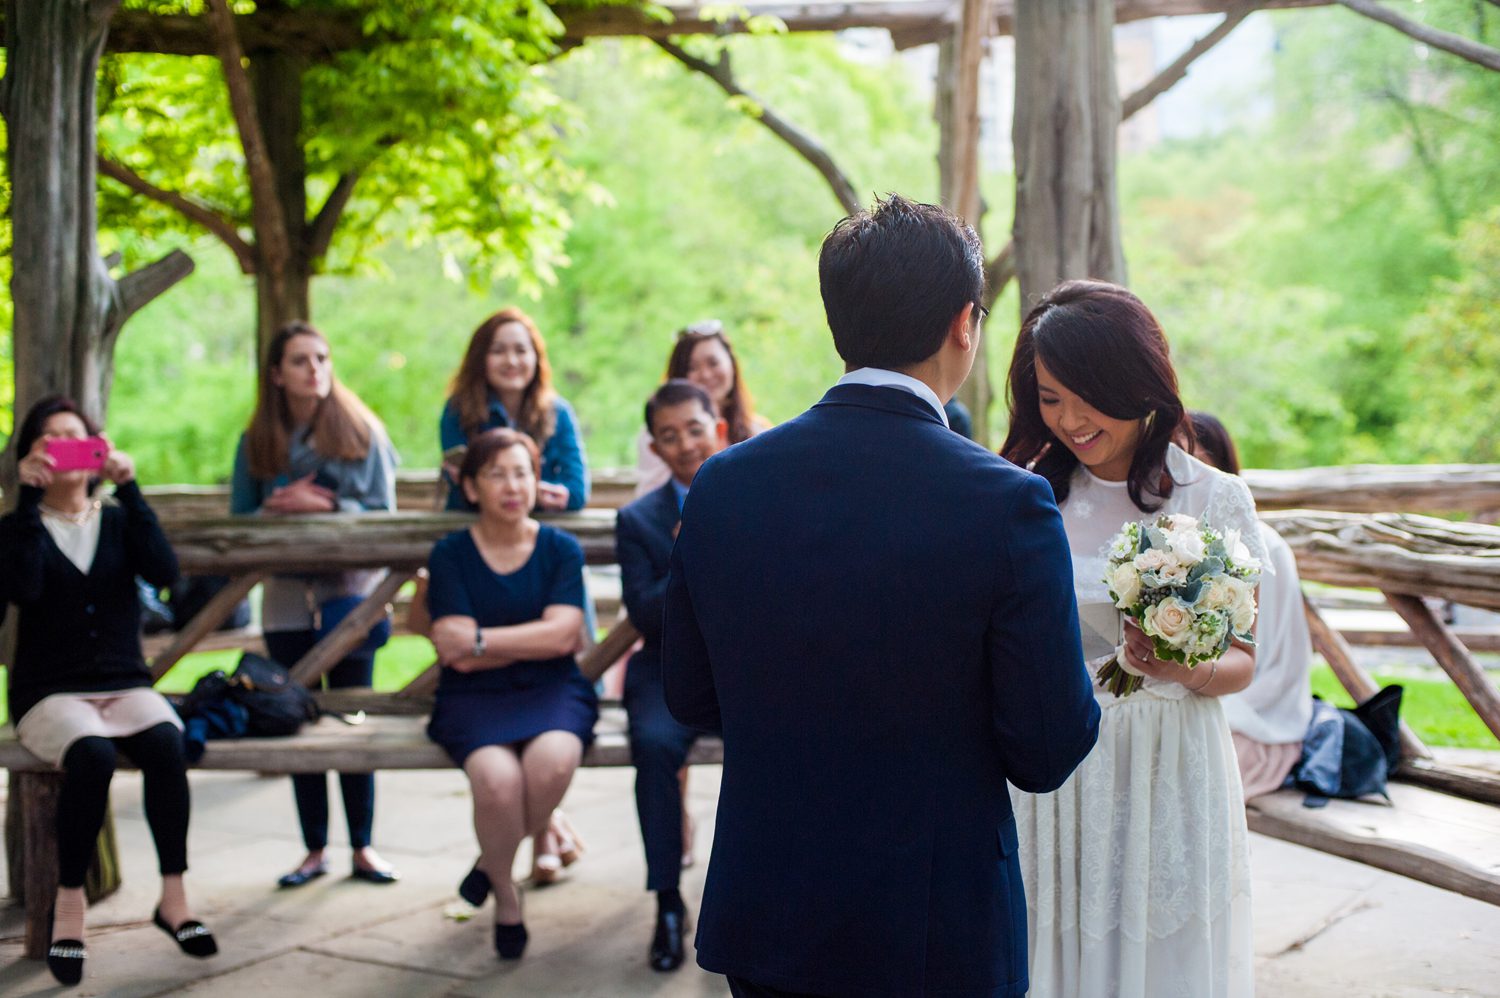 Wedding Locations for groups in Central Park 